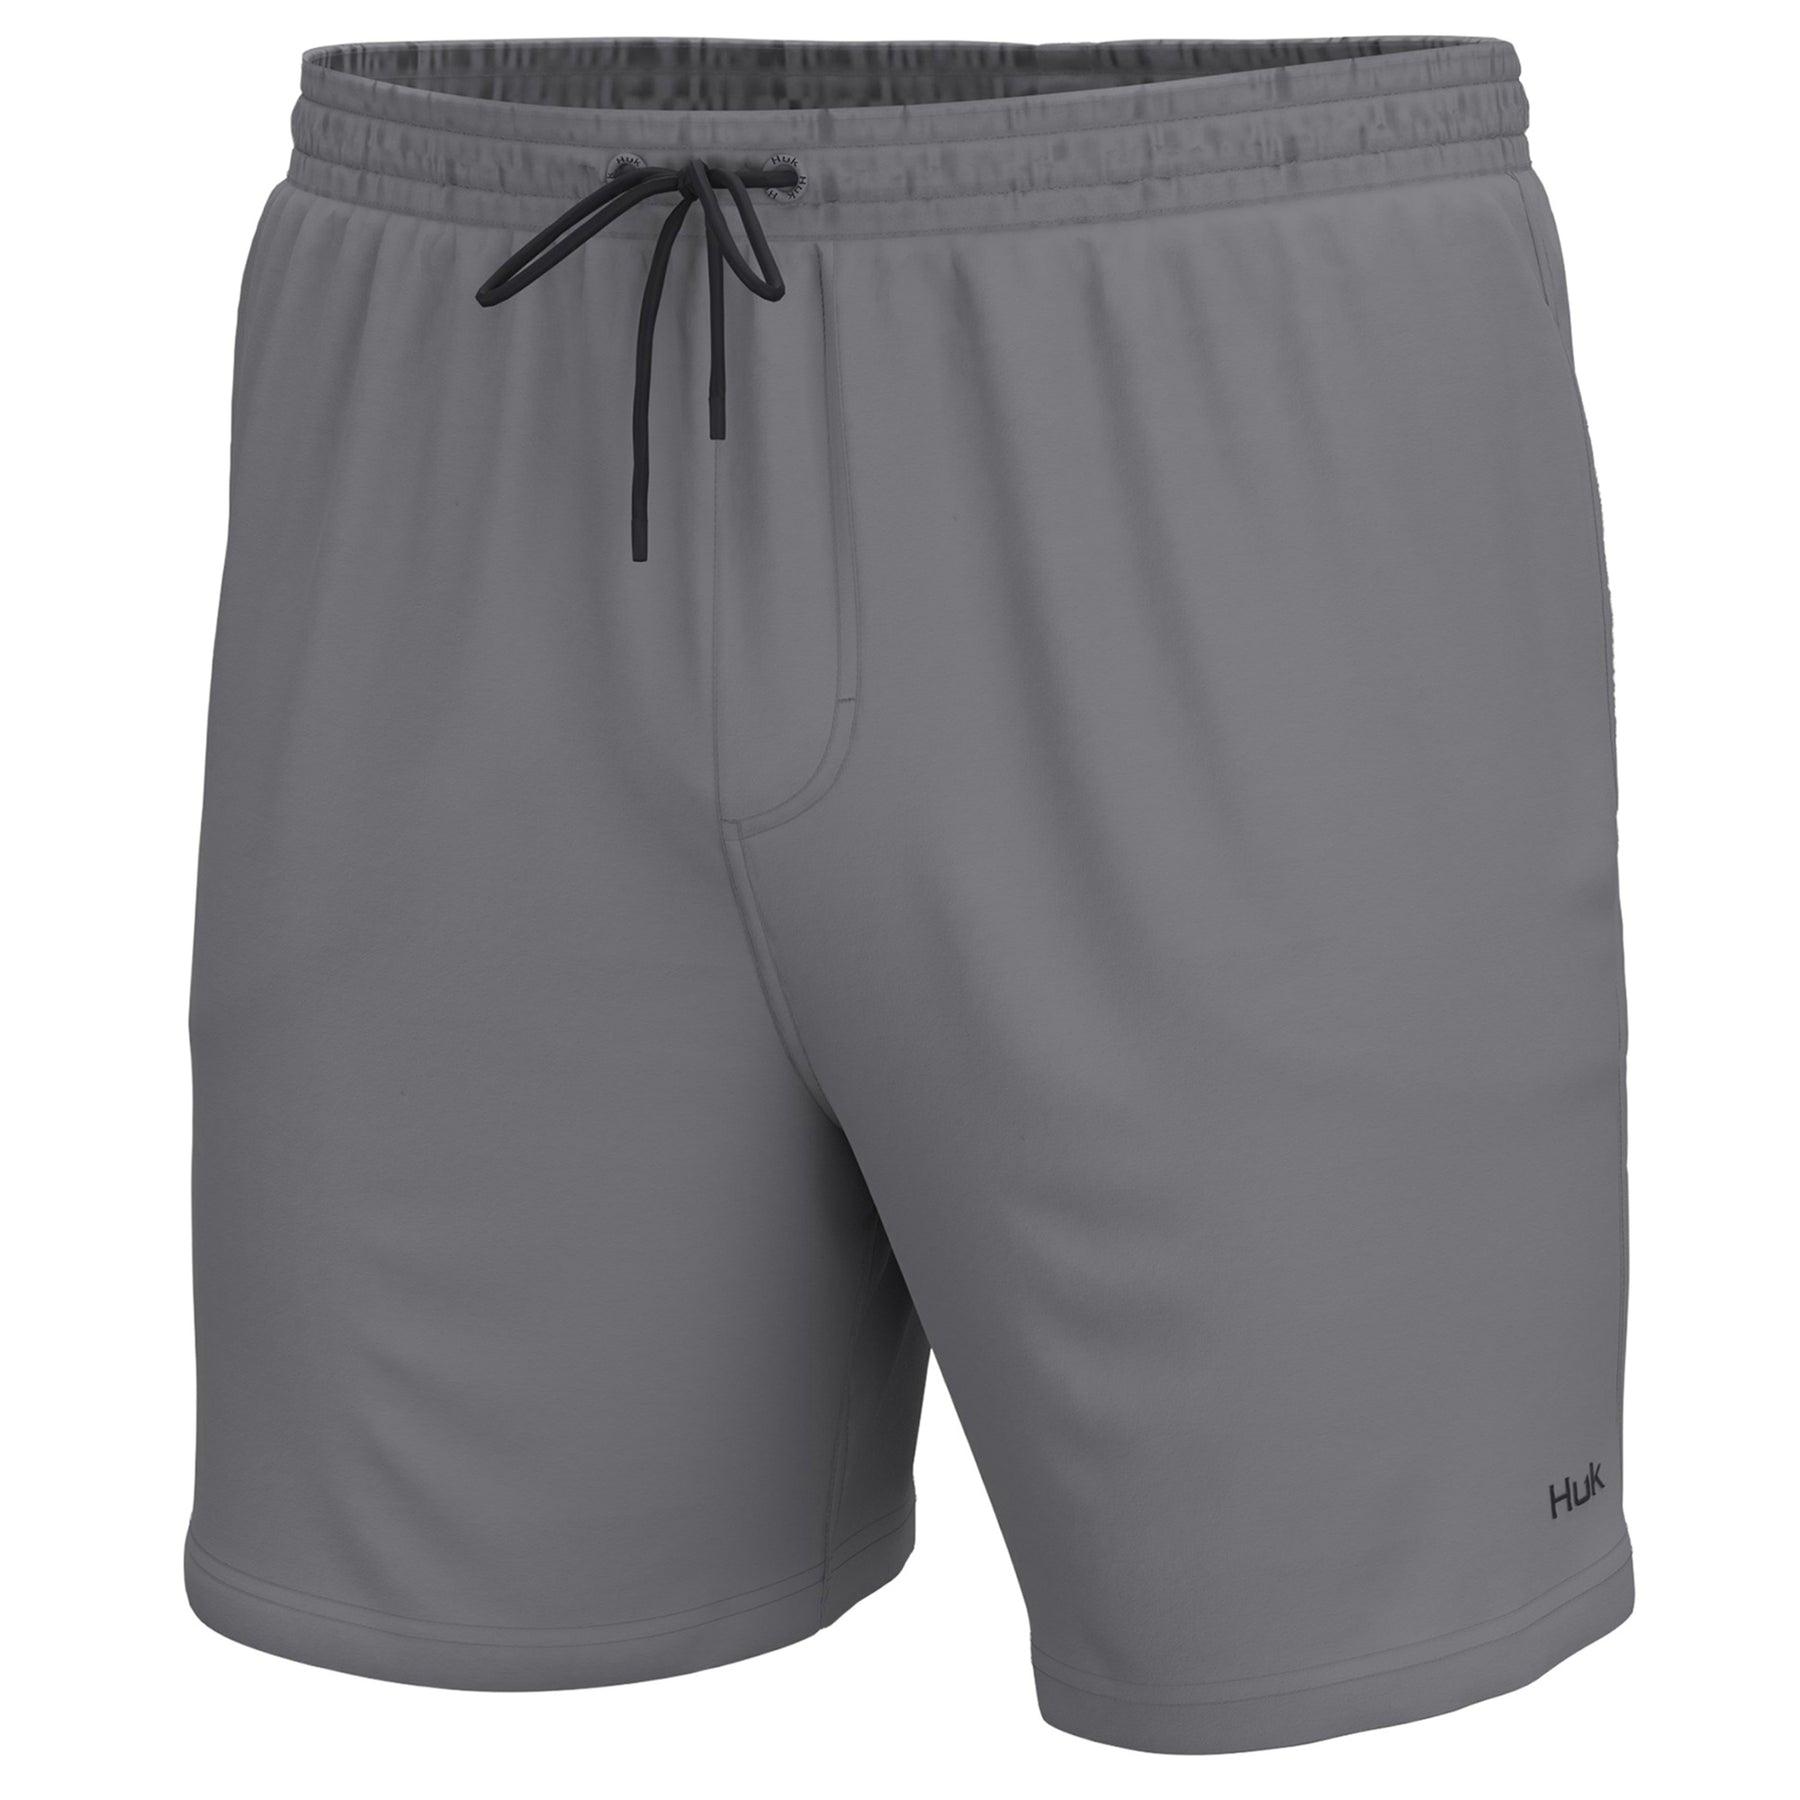 Buy night-owl HUK PURSUIT VOLLEY SHORTS